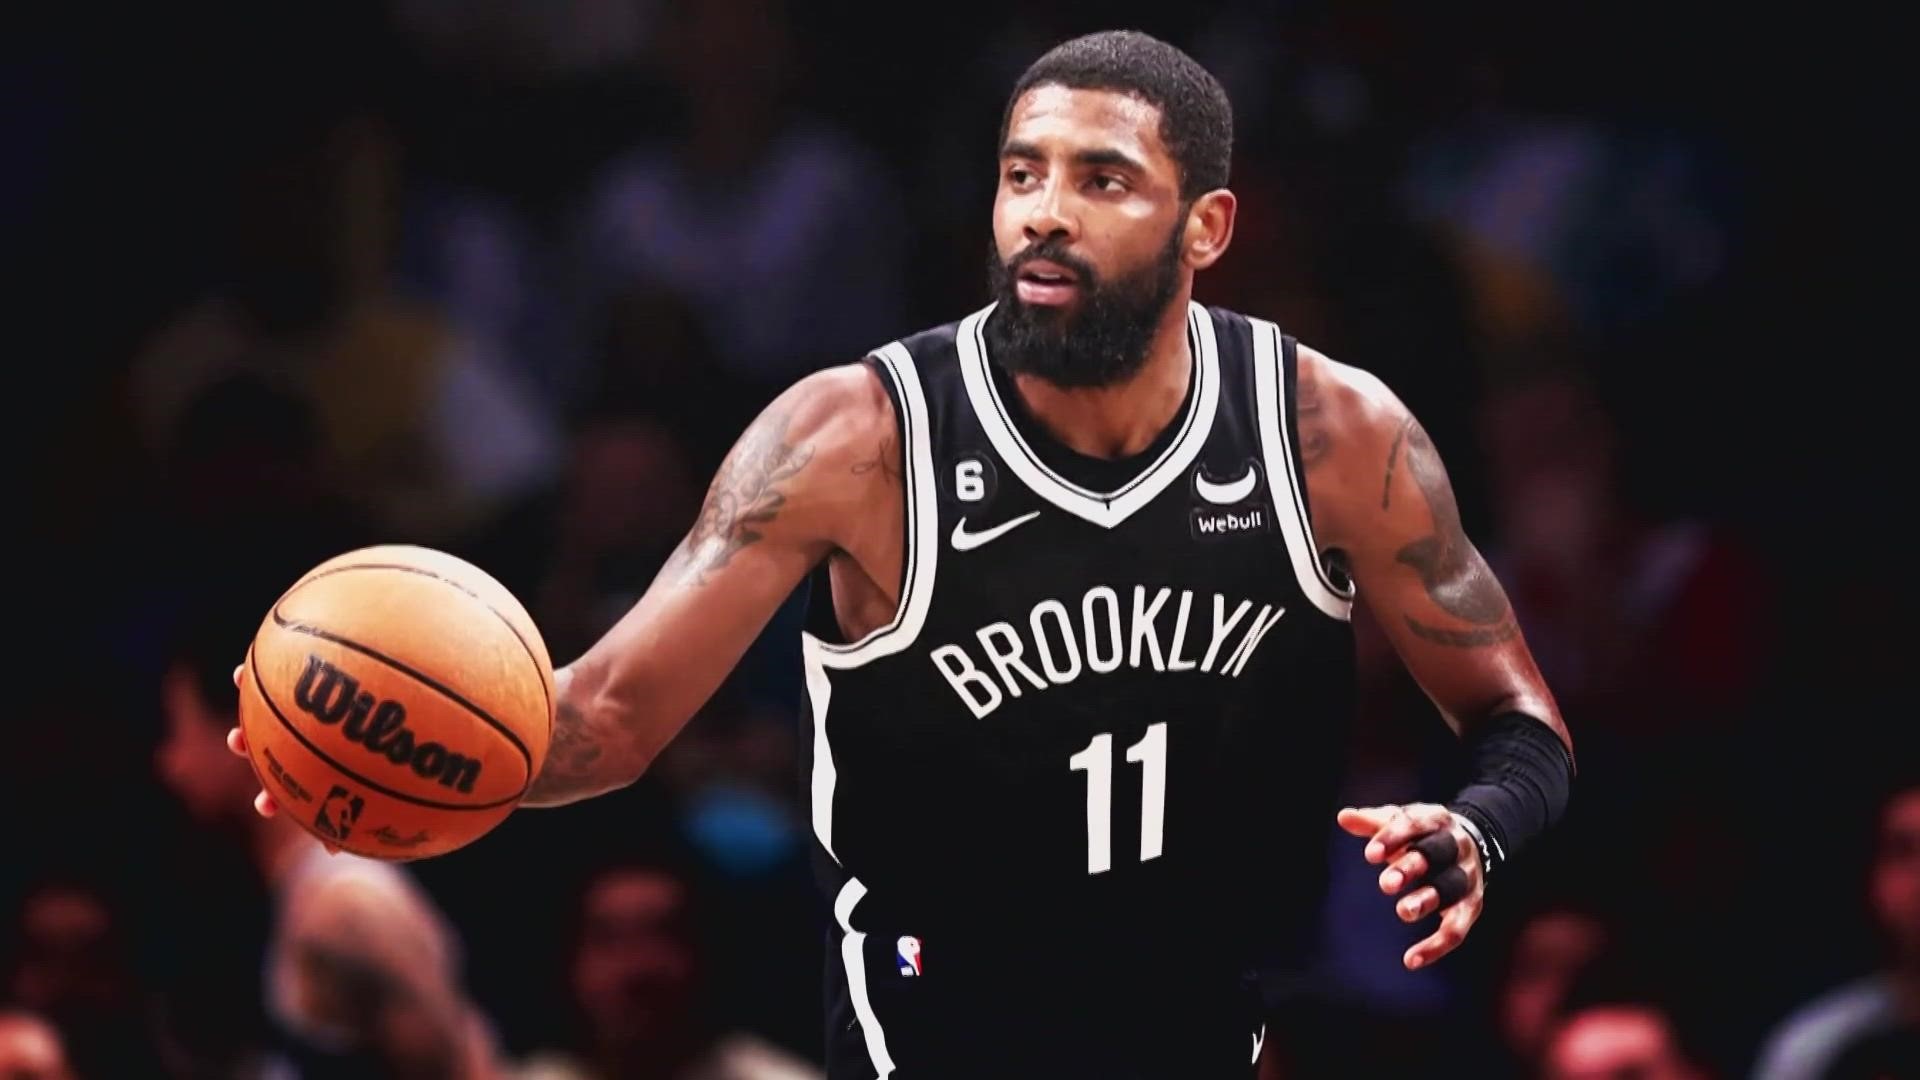 Kyrie Irving is expected to be a new weapon and a true NBA star to pair with Luka Doncic, but he also has a less-than-stellar reputation off the court.